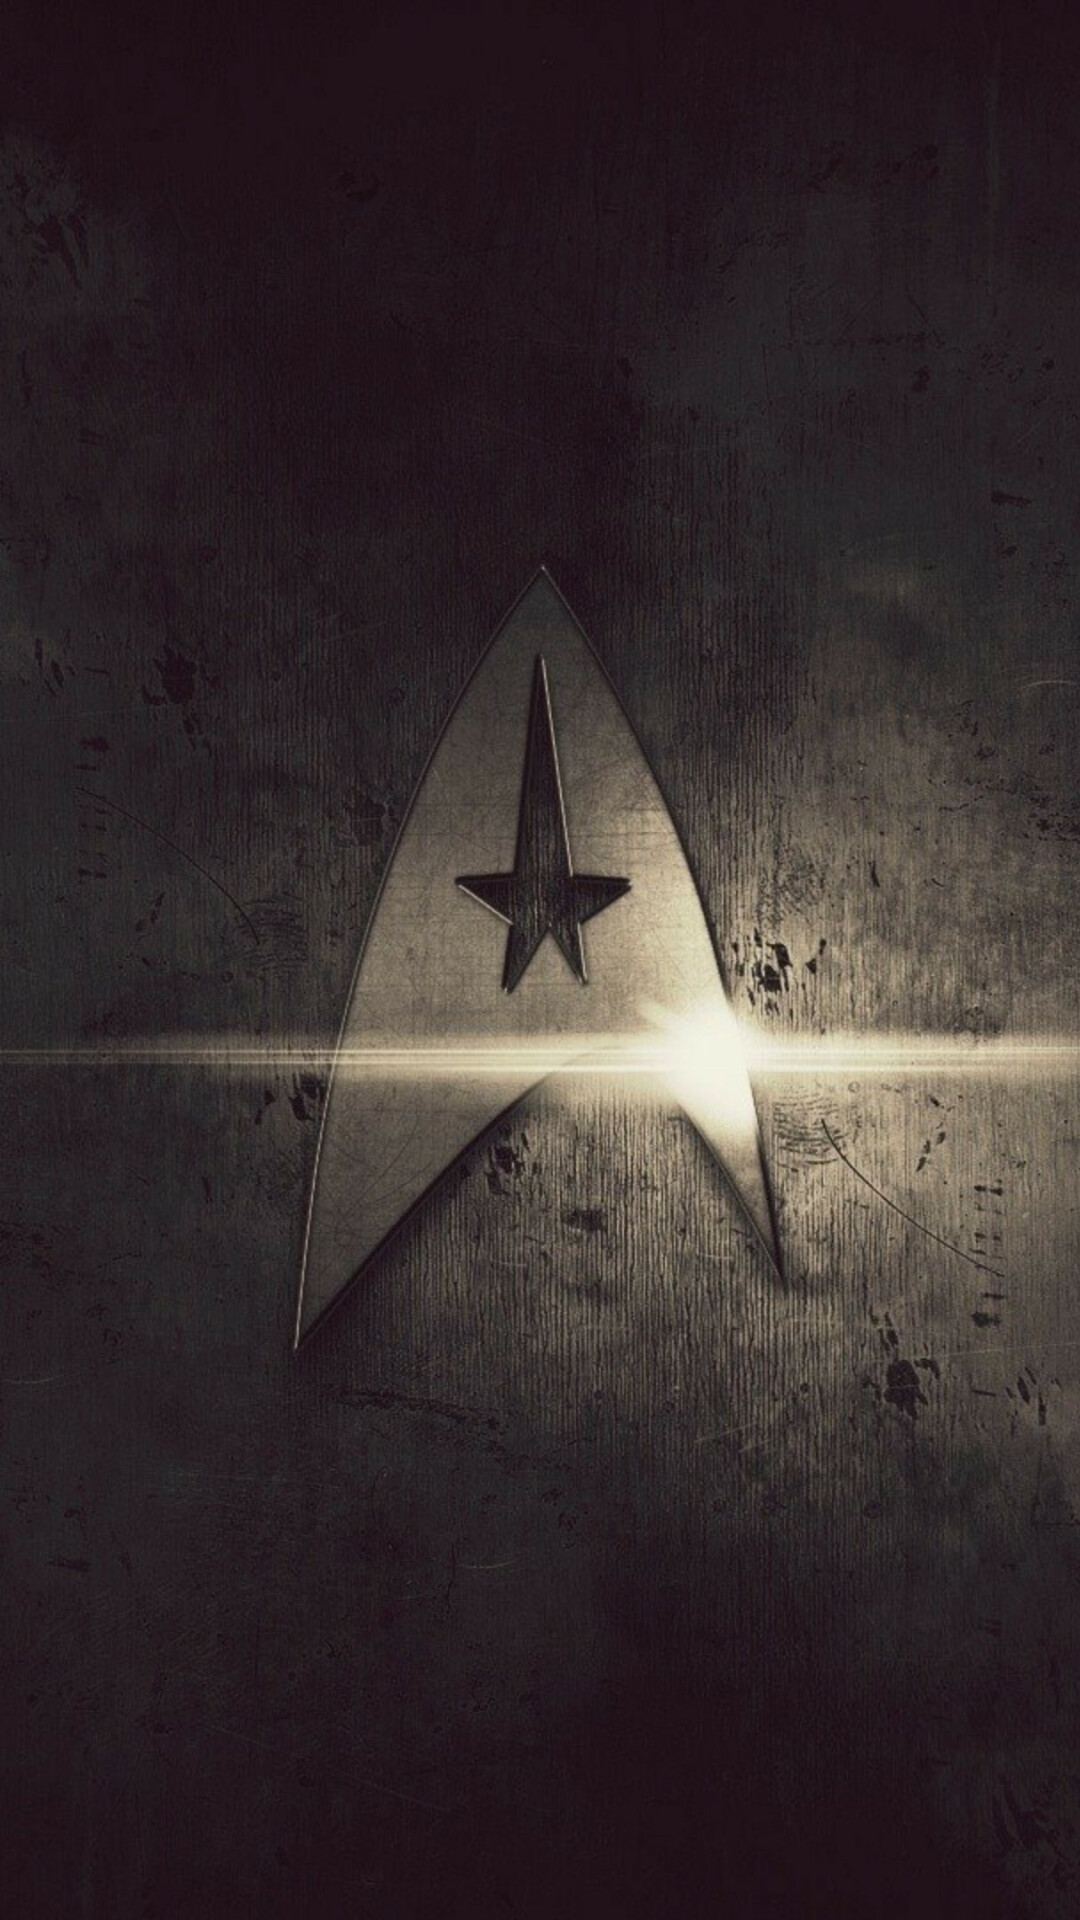 Star Trek: Chronicles the exploits of the crew of the starship USS Enterprise, whose five-year mission is to explore space, Emblem. 1080x1920 Full HD Wallpaper.